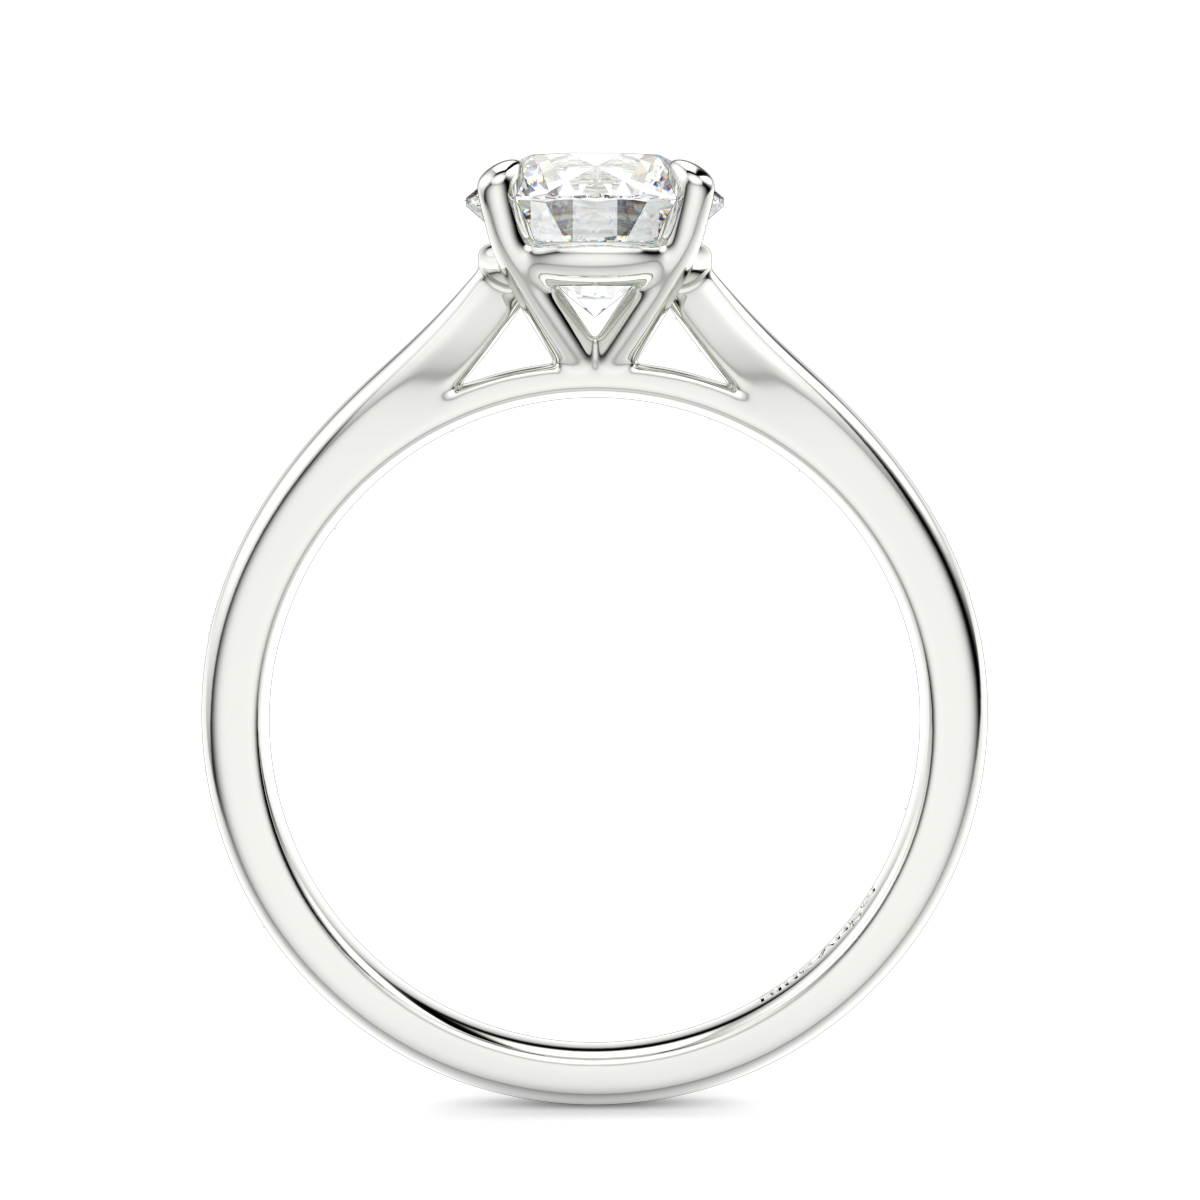 Solitaire Round 4 Claw Engagement Ring - BAJ-RB1-108-18K-WG